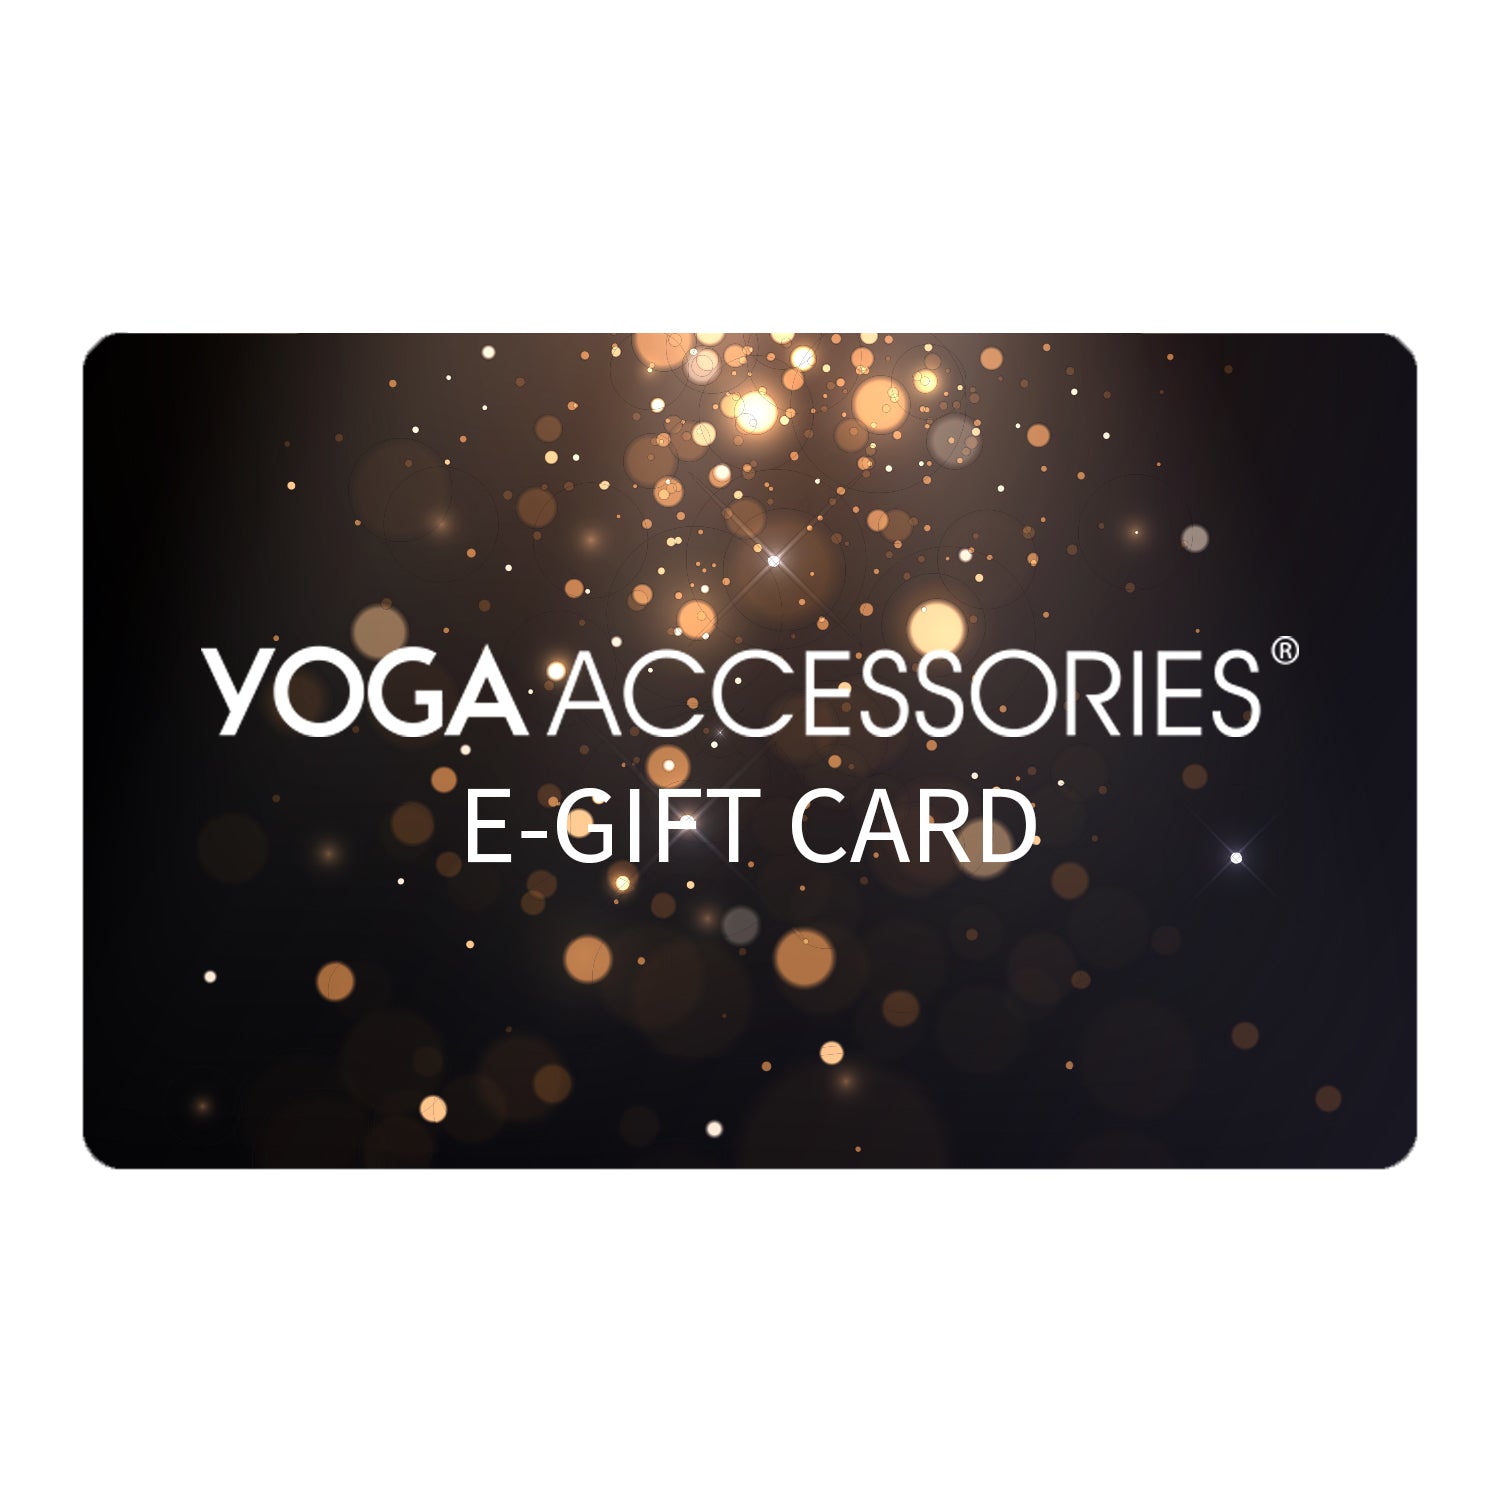 E-Gift Card from YOGA Accessories – Yoga Accessories